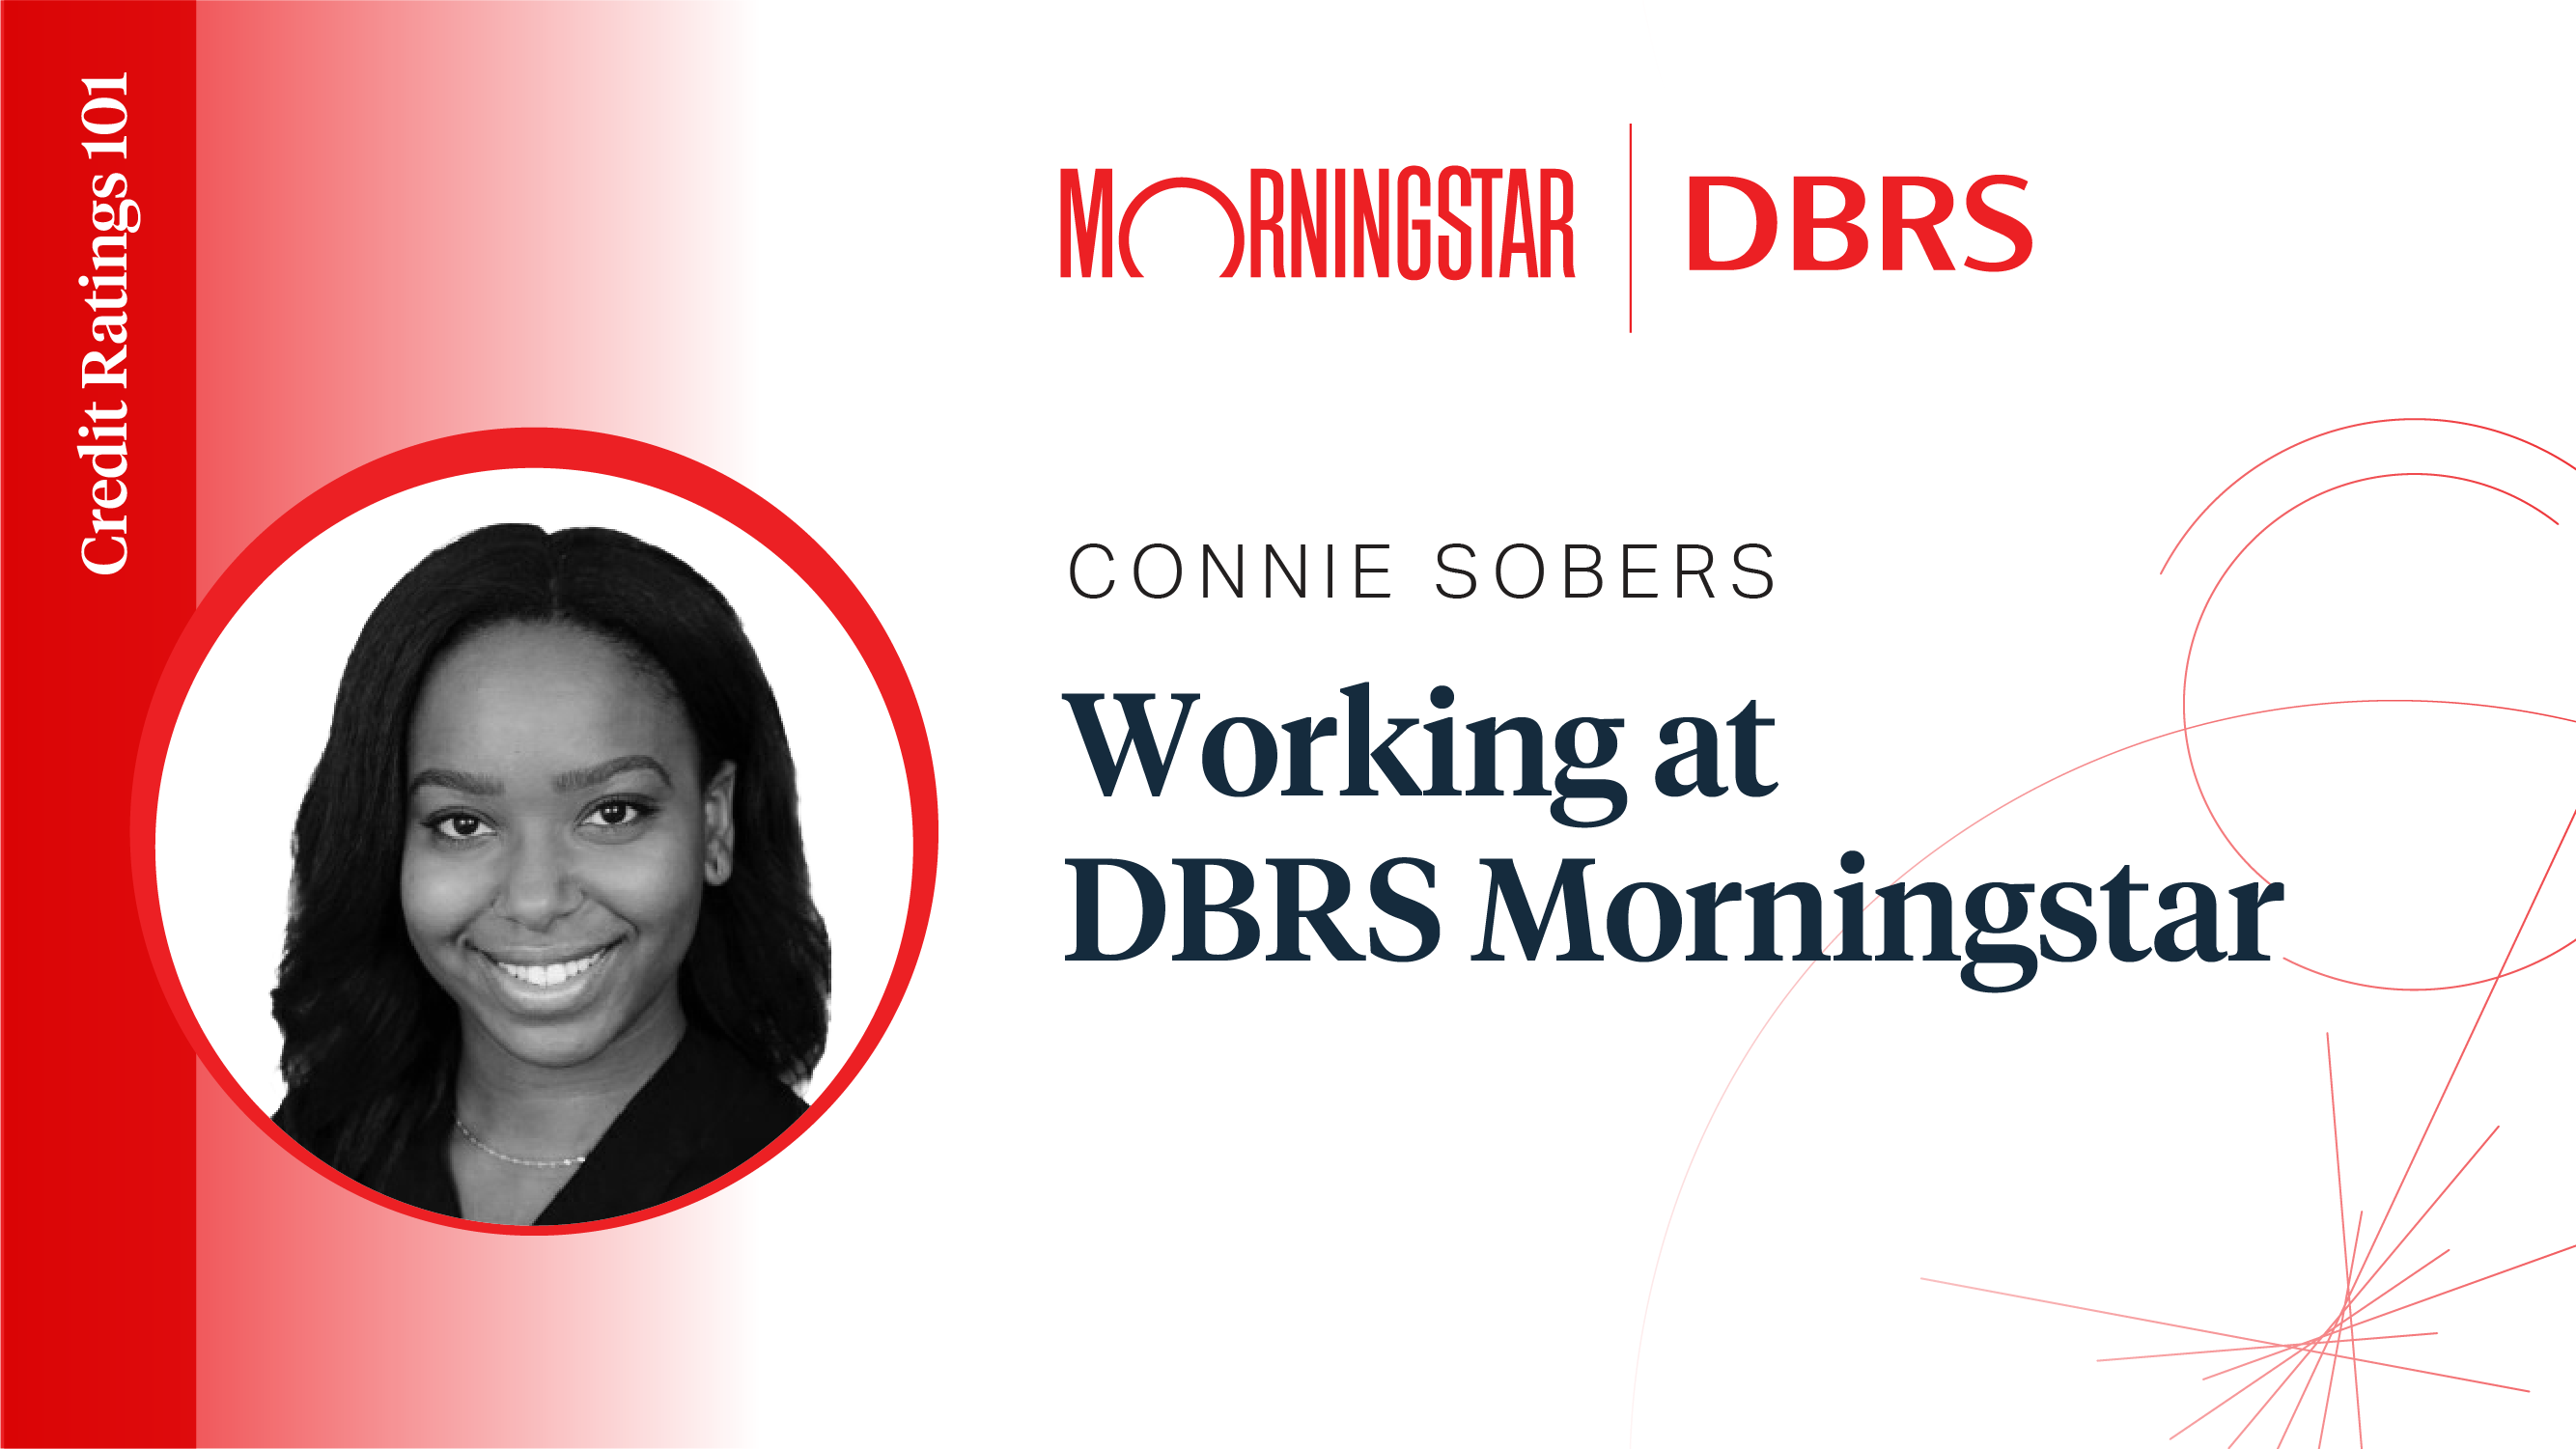 Credit Ratings 101: Connie Sobers - Working at DBRS Morningstar